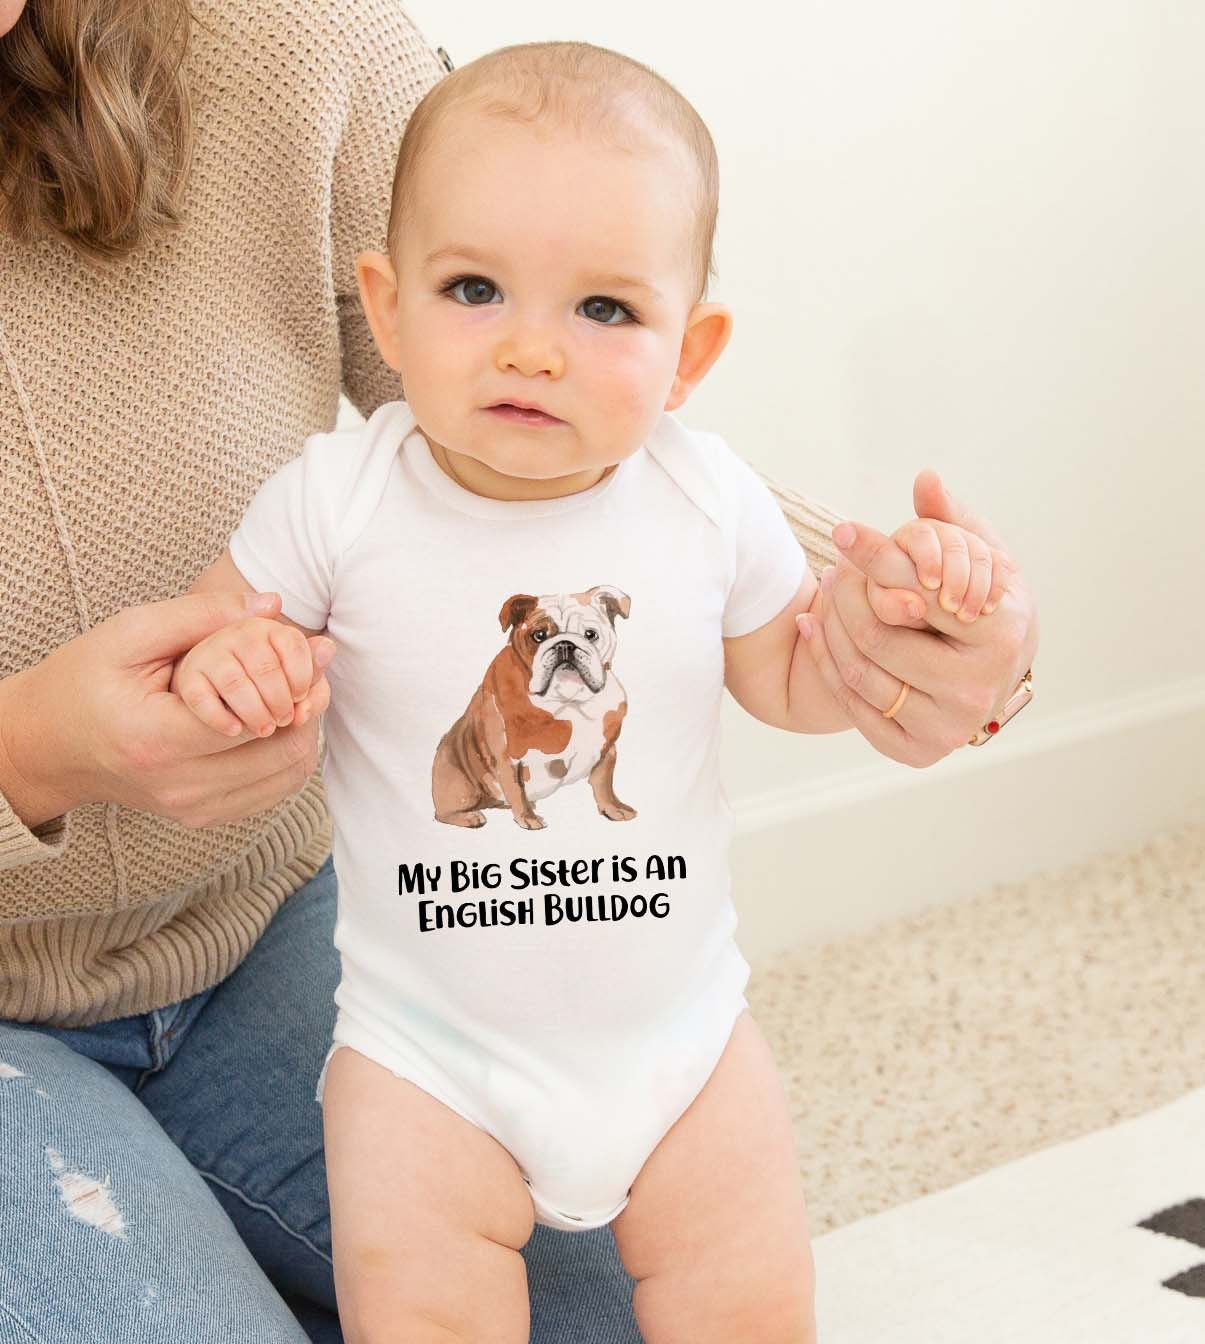 Dog Themed Baby Shower Gift For Girls Boys Kleding Unisex kinderkleding Unisex babykleding Broek Organic Cotton Baby Clothes English Bulldog Baby Leggings Newborn Coming Home Outfit Unisex 